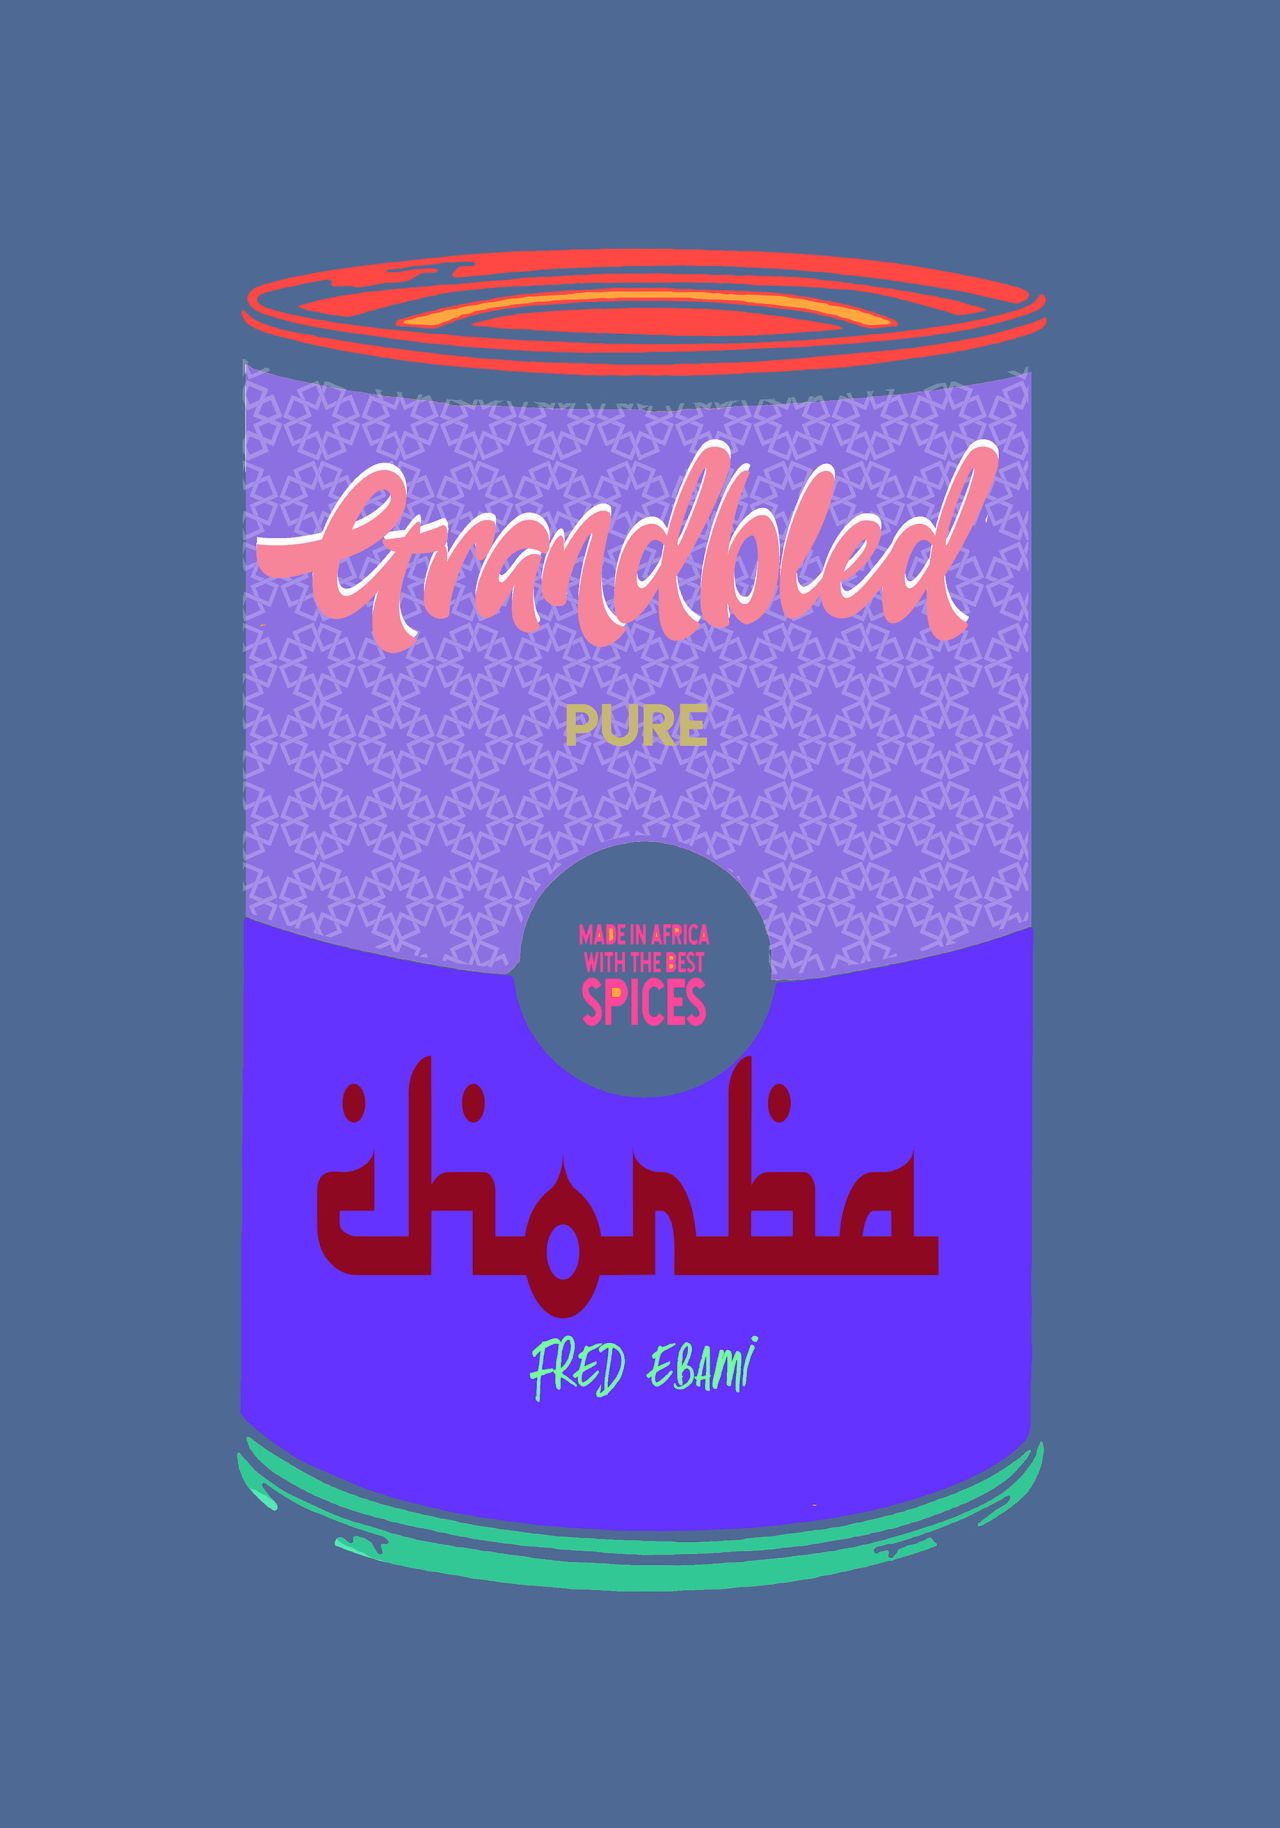 Ebami works digitally, using only a computer mouse to draw with. Some of his works parody classic Pop Art images, such as this piece inspired by Warhol's Campbell's Soup Cans. This image shows a traditional north African soup, part of a series where Ebami hoped to "pick up where Warhol left his collection," showing soups from around the world. Chorba, GRAND BLED SOUP, 2021.